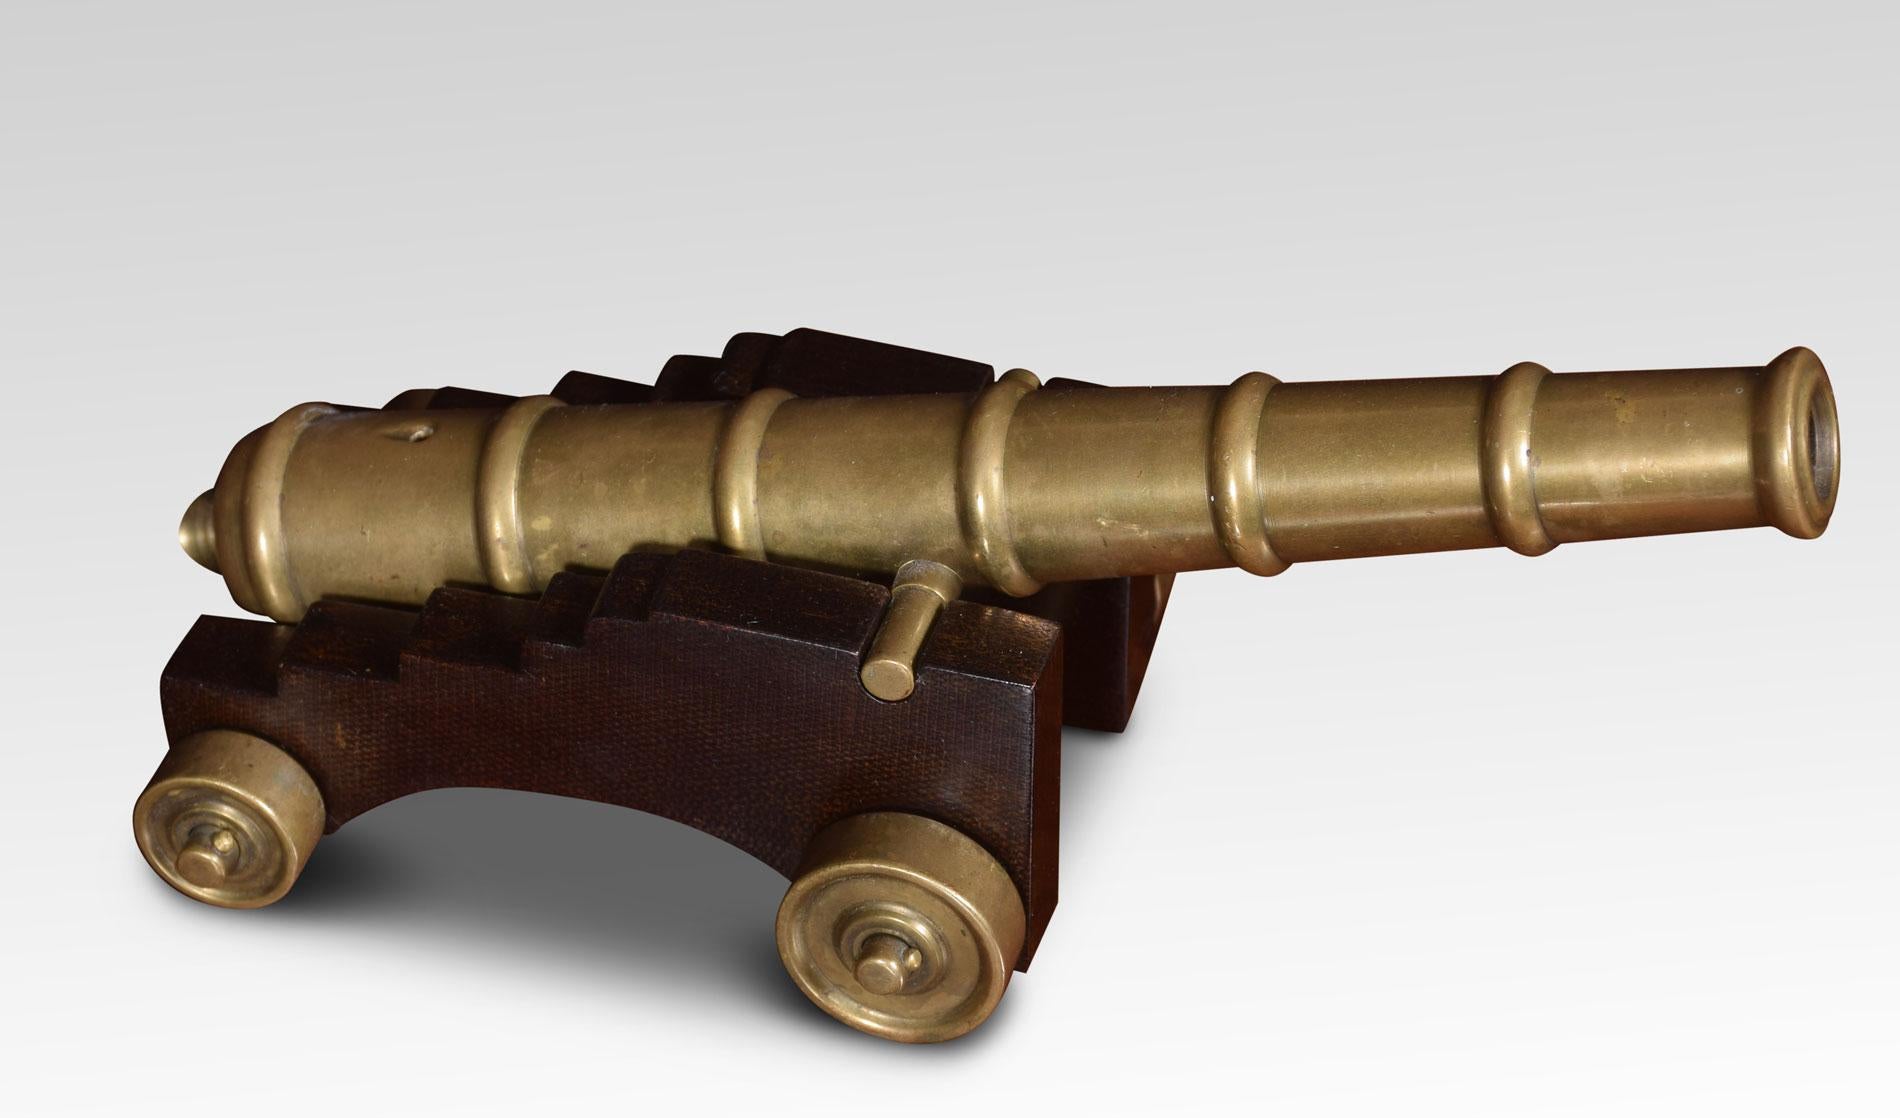 Bronze desktop model of a signal cannon on Bakelite carriage with bronze wheels.
Dimensions:
Height 4 inches
Width 10 inches
Depth 4.5 inches.